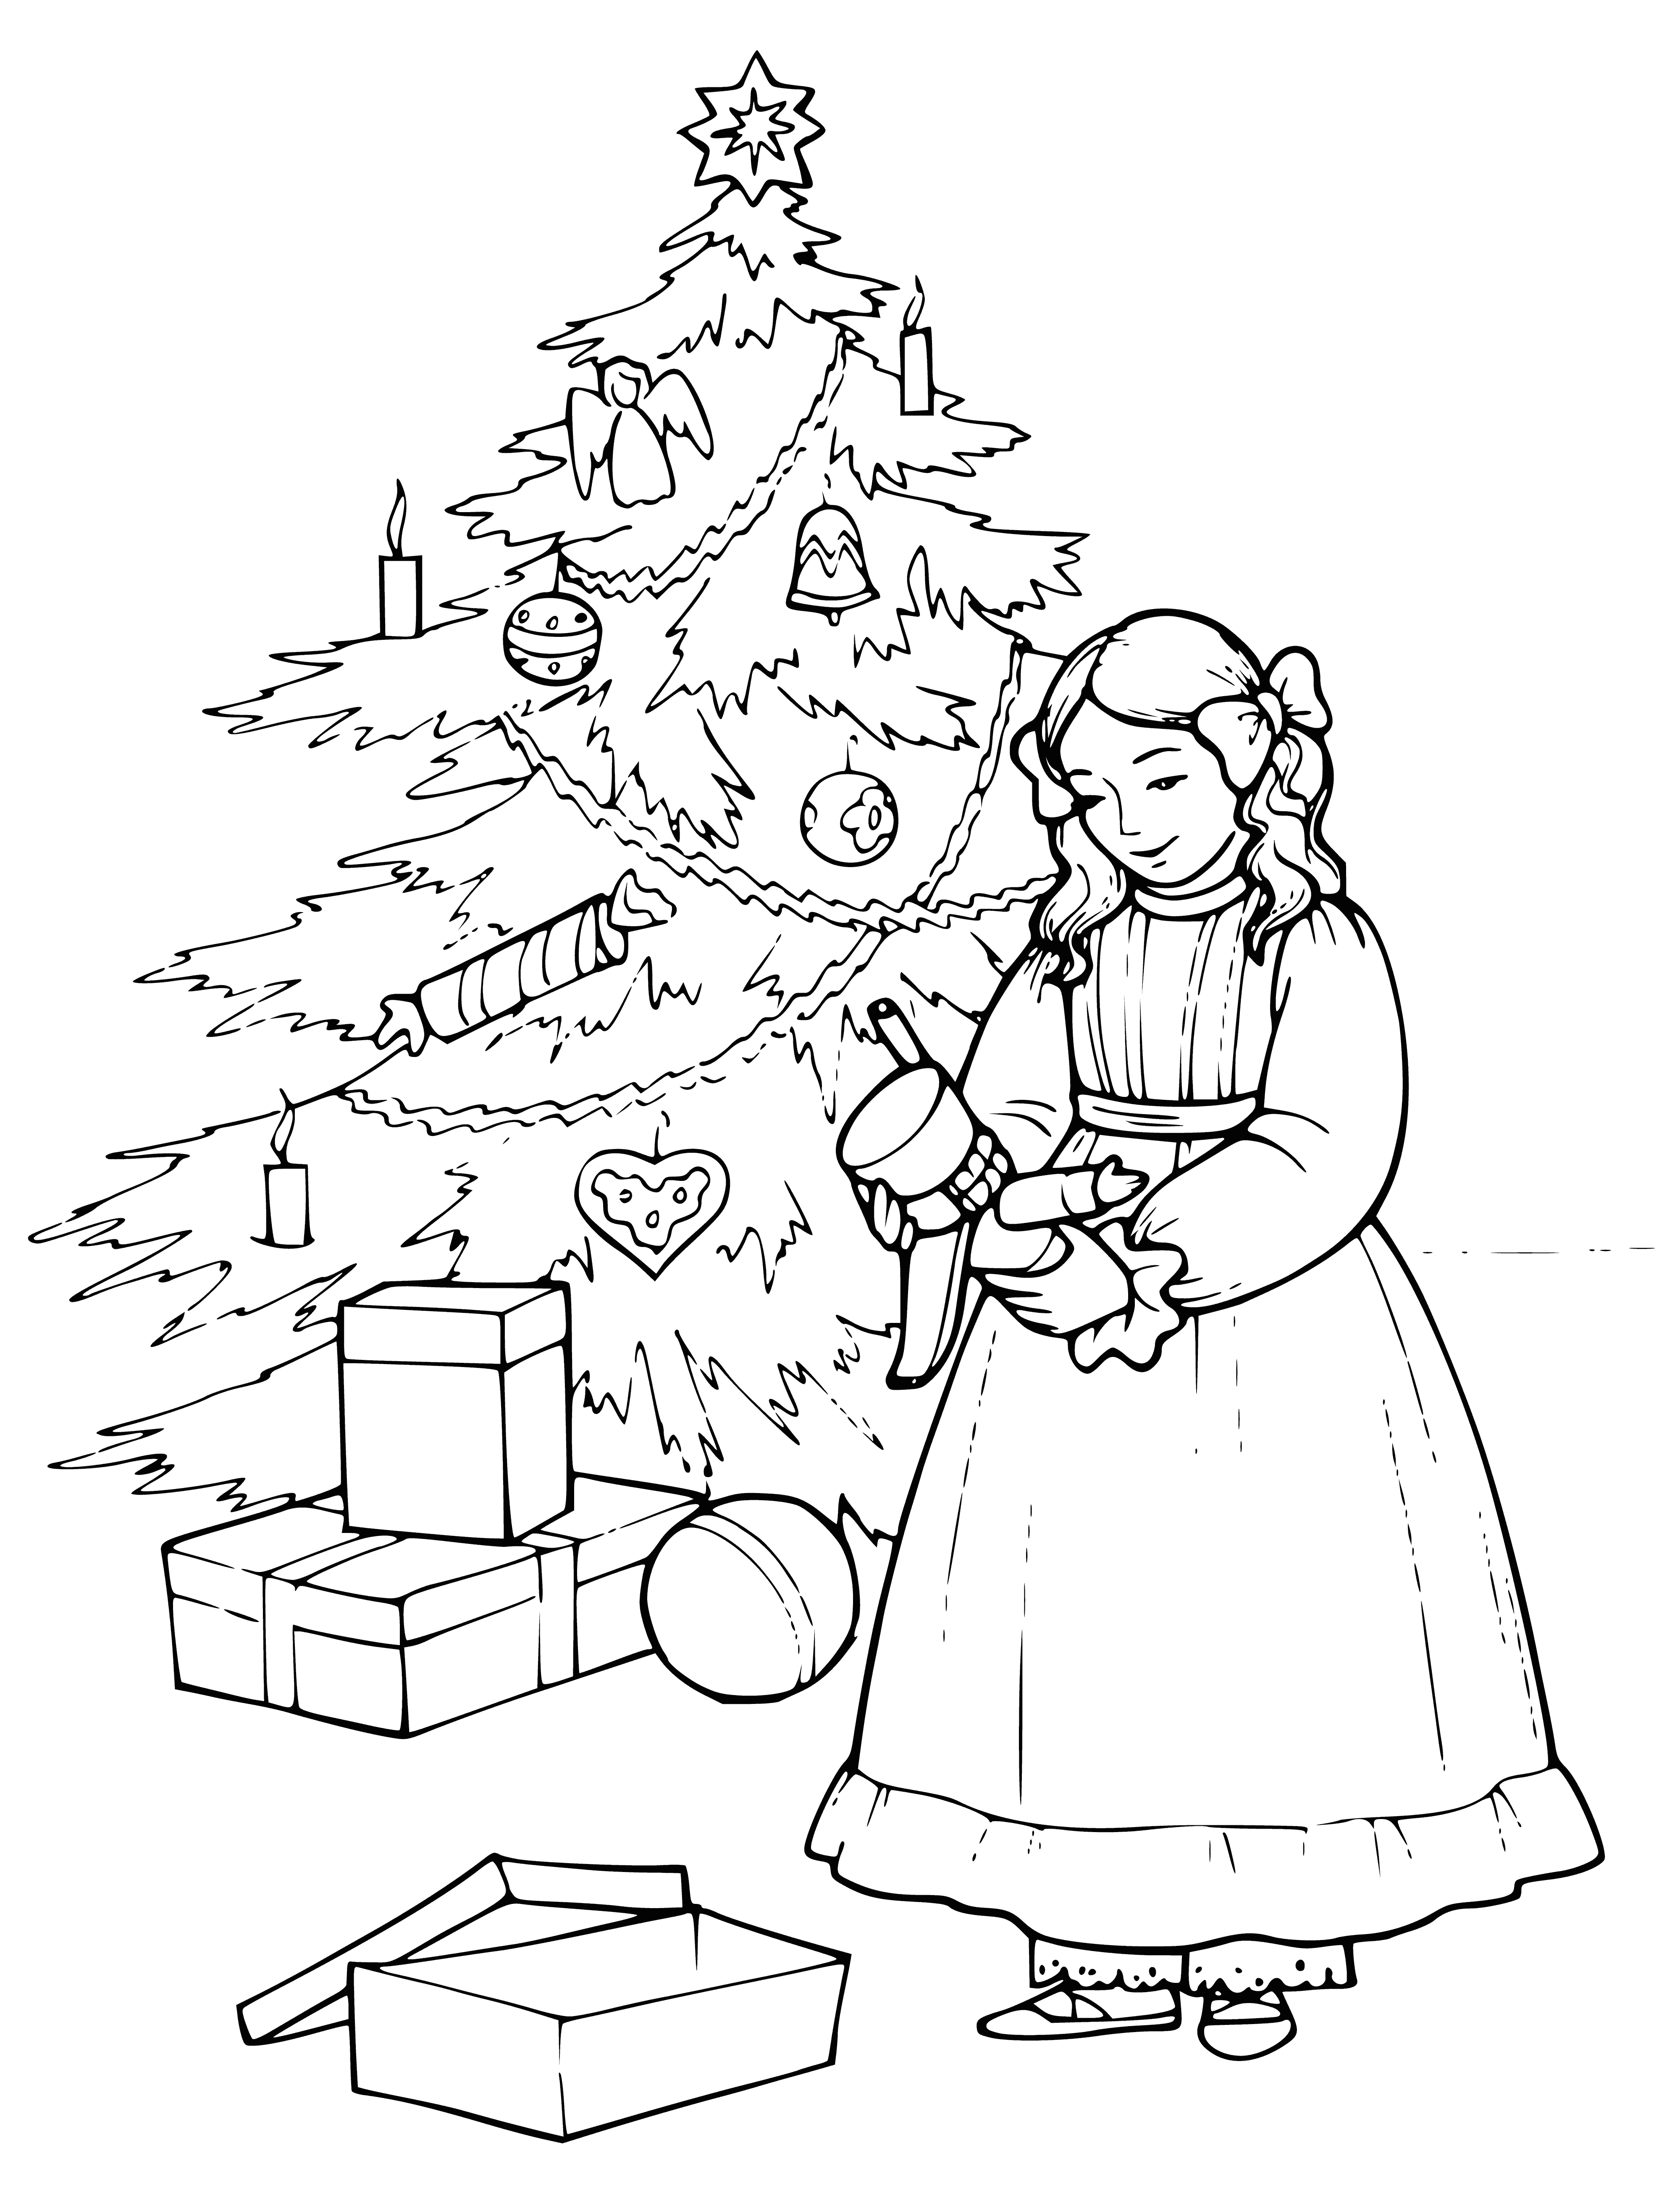 Marie at the Christmas tree coloring page